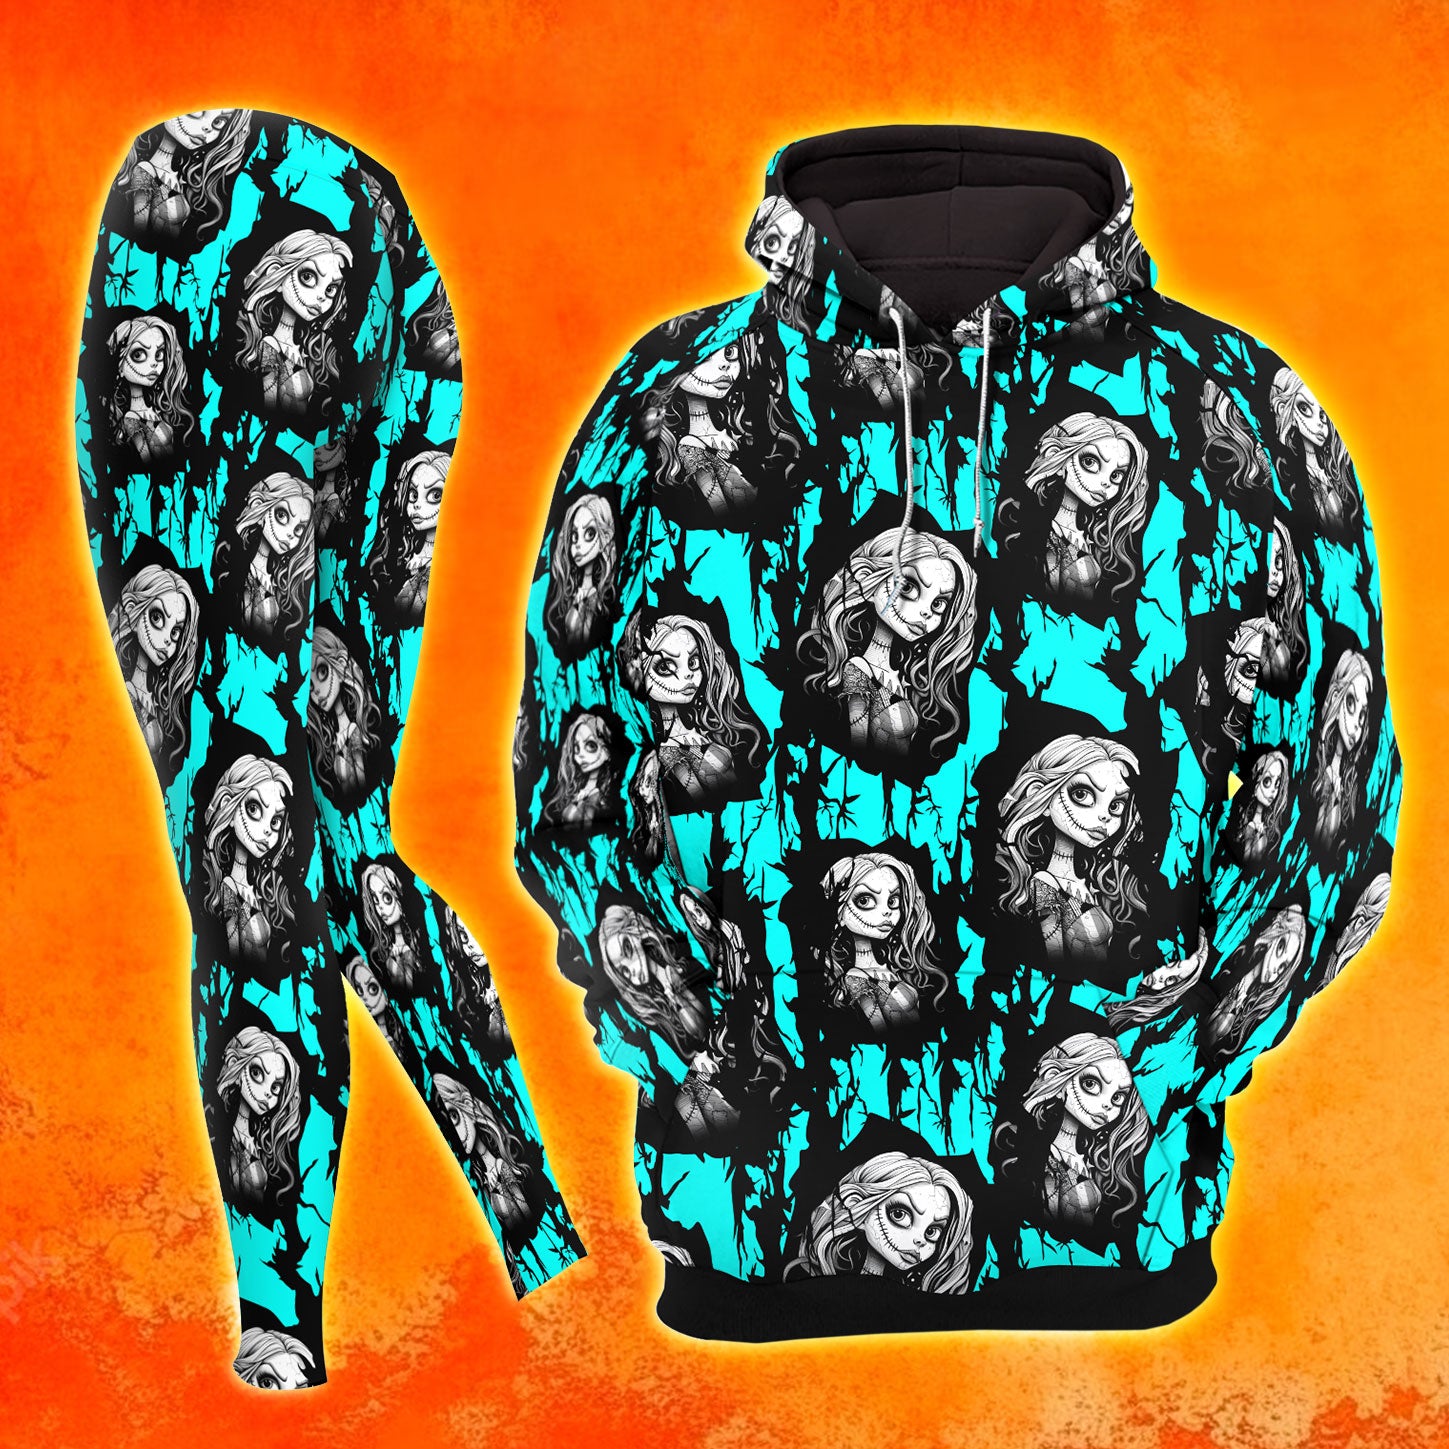 Cyan Nightmare Art Combo Hoodie and Leggings - Dark and edgy matching set with skull designs for a unique and stylish look